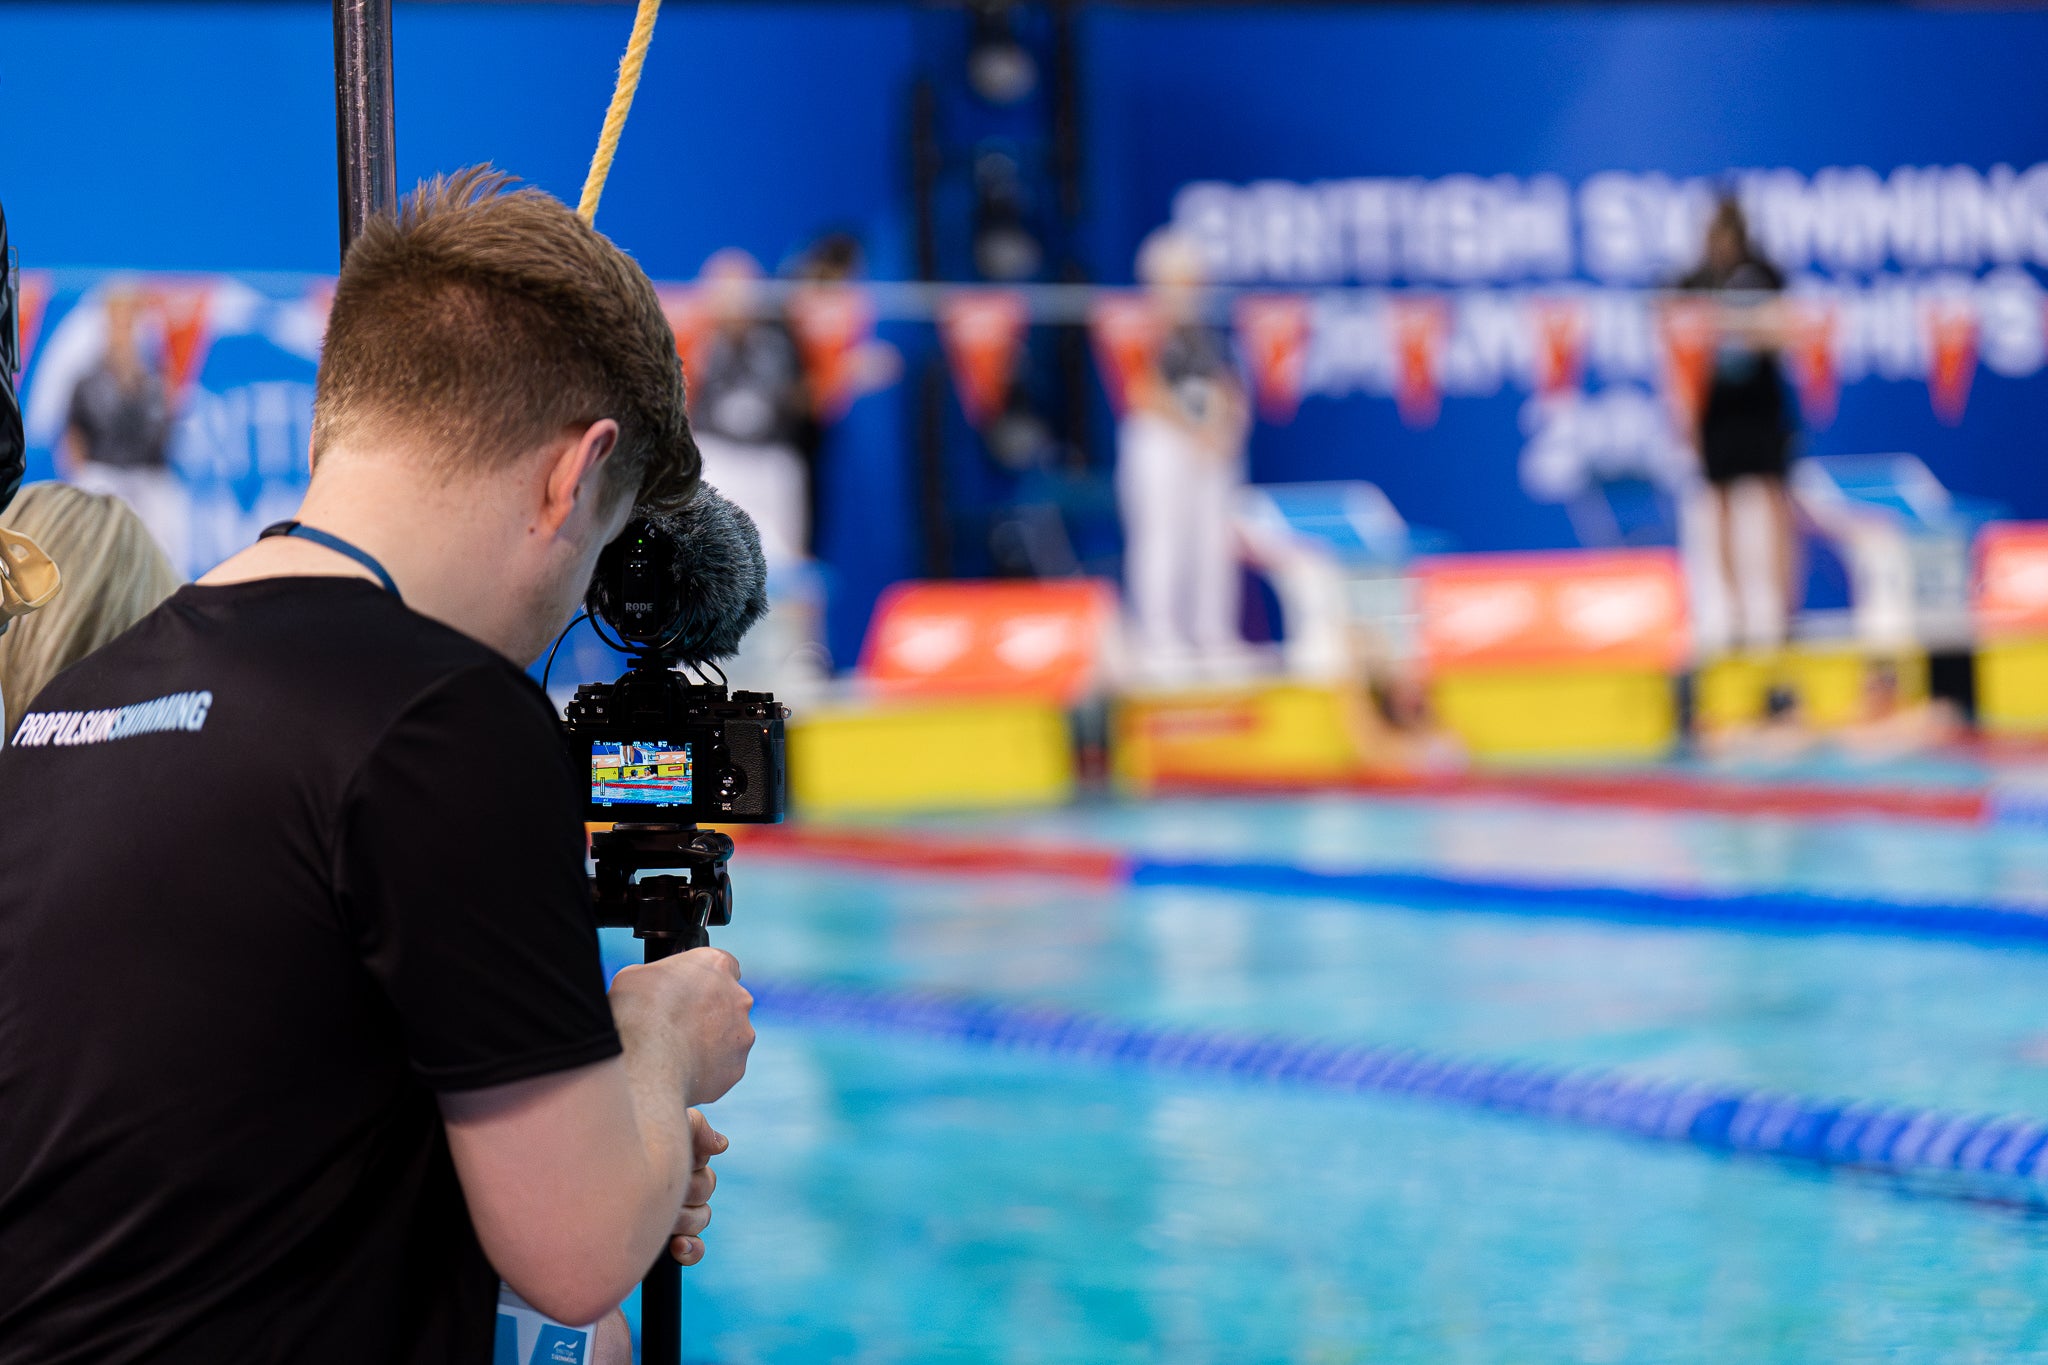 Scott from Propulsion Swimming filming the British Swimming Championships 2023 wear a Technical poolside top